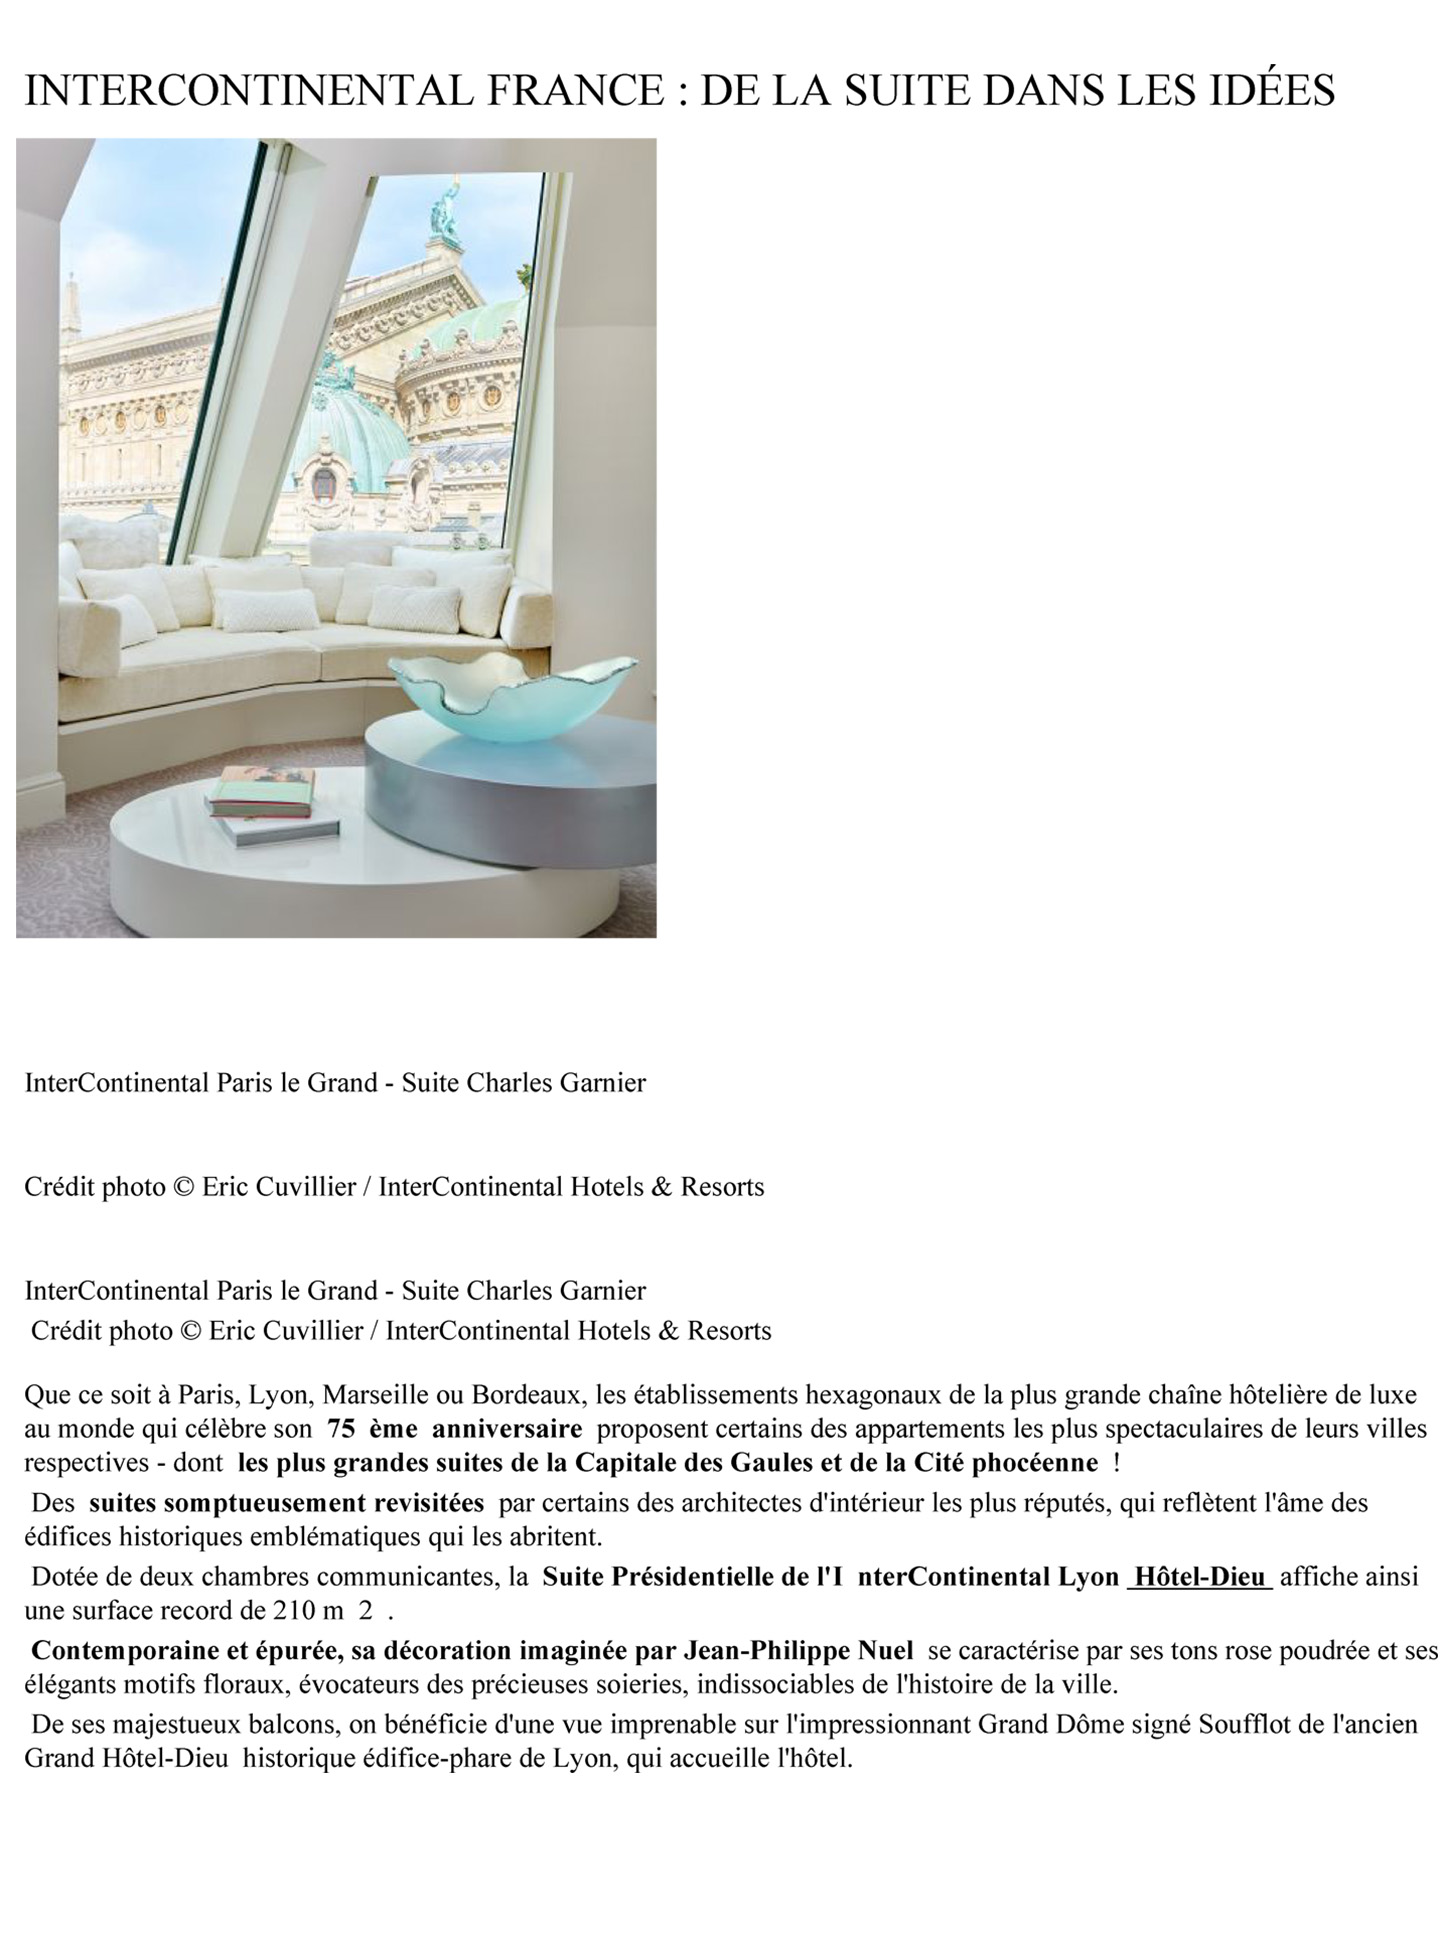 article on the collaboration between the studio jean-phiippe nuel and InterContinental for the renovation of several god hotels and their transformation into 5 star luxury hotels